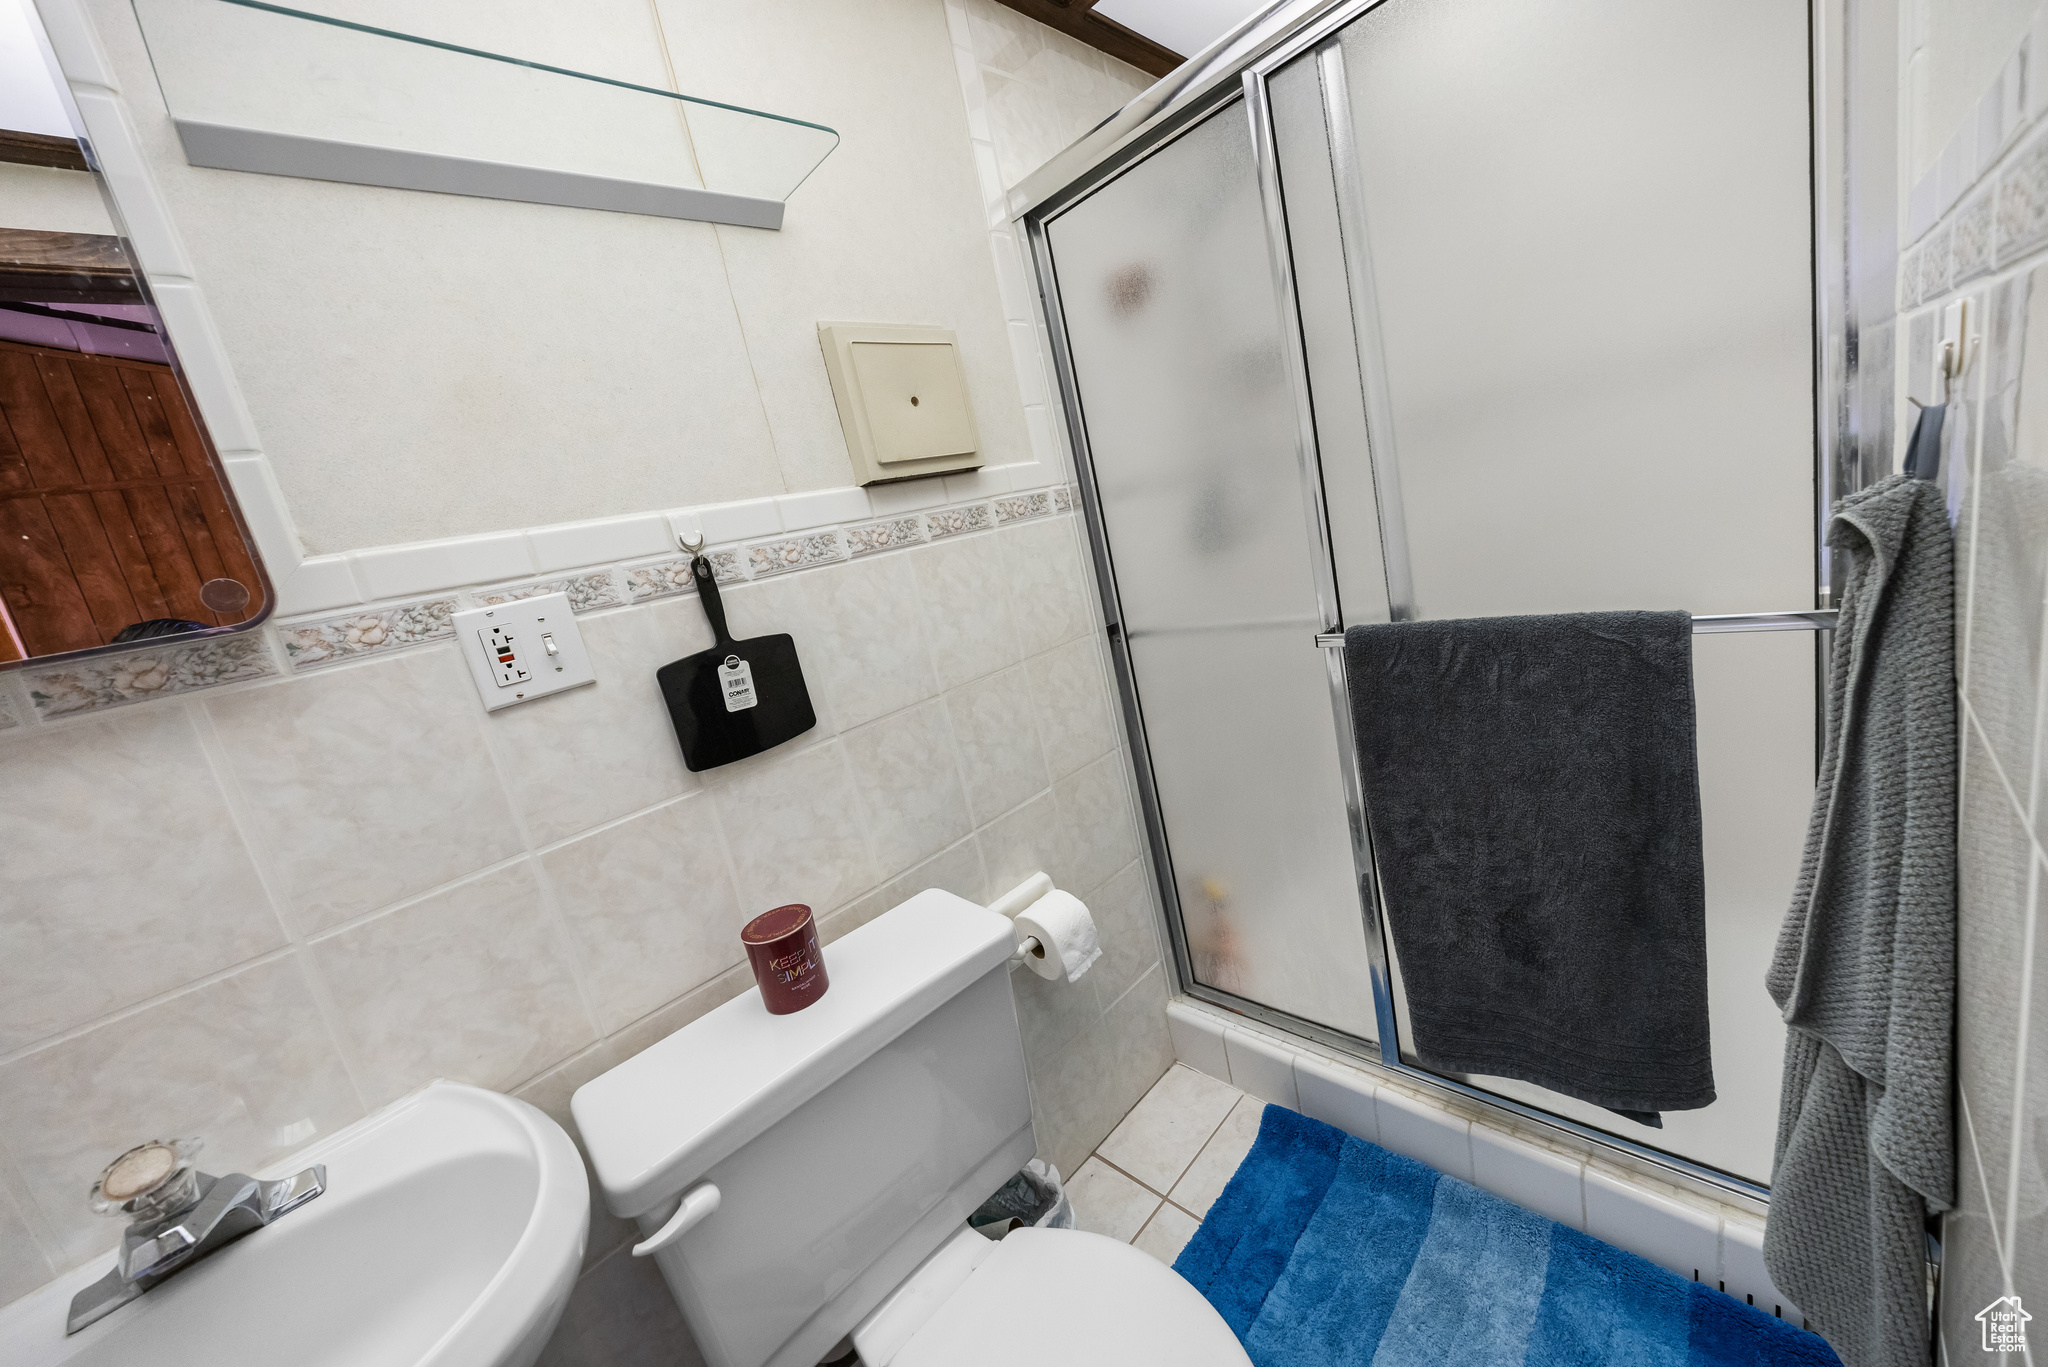 Bathroom featuring tile floors, tile walls, a shower with shower door, sink, and toilet